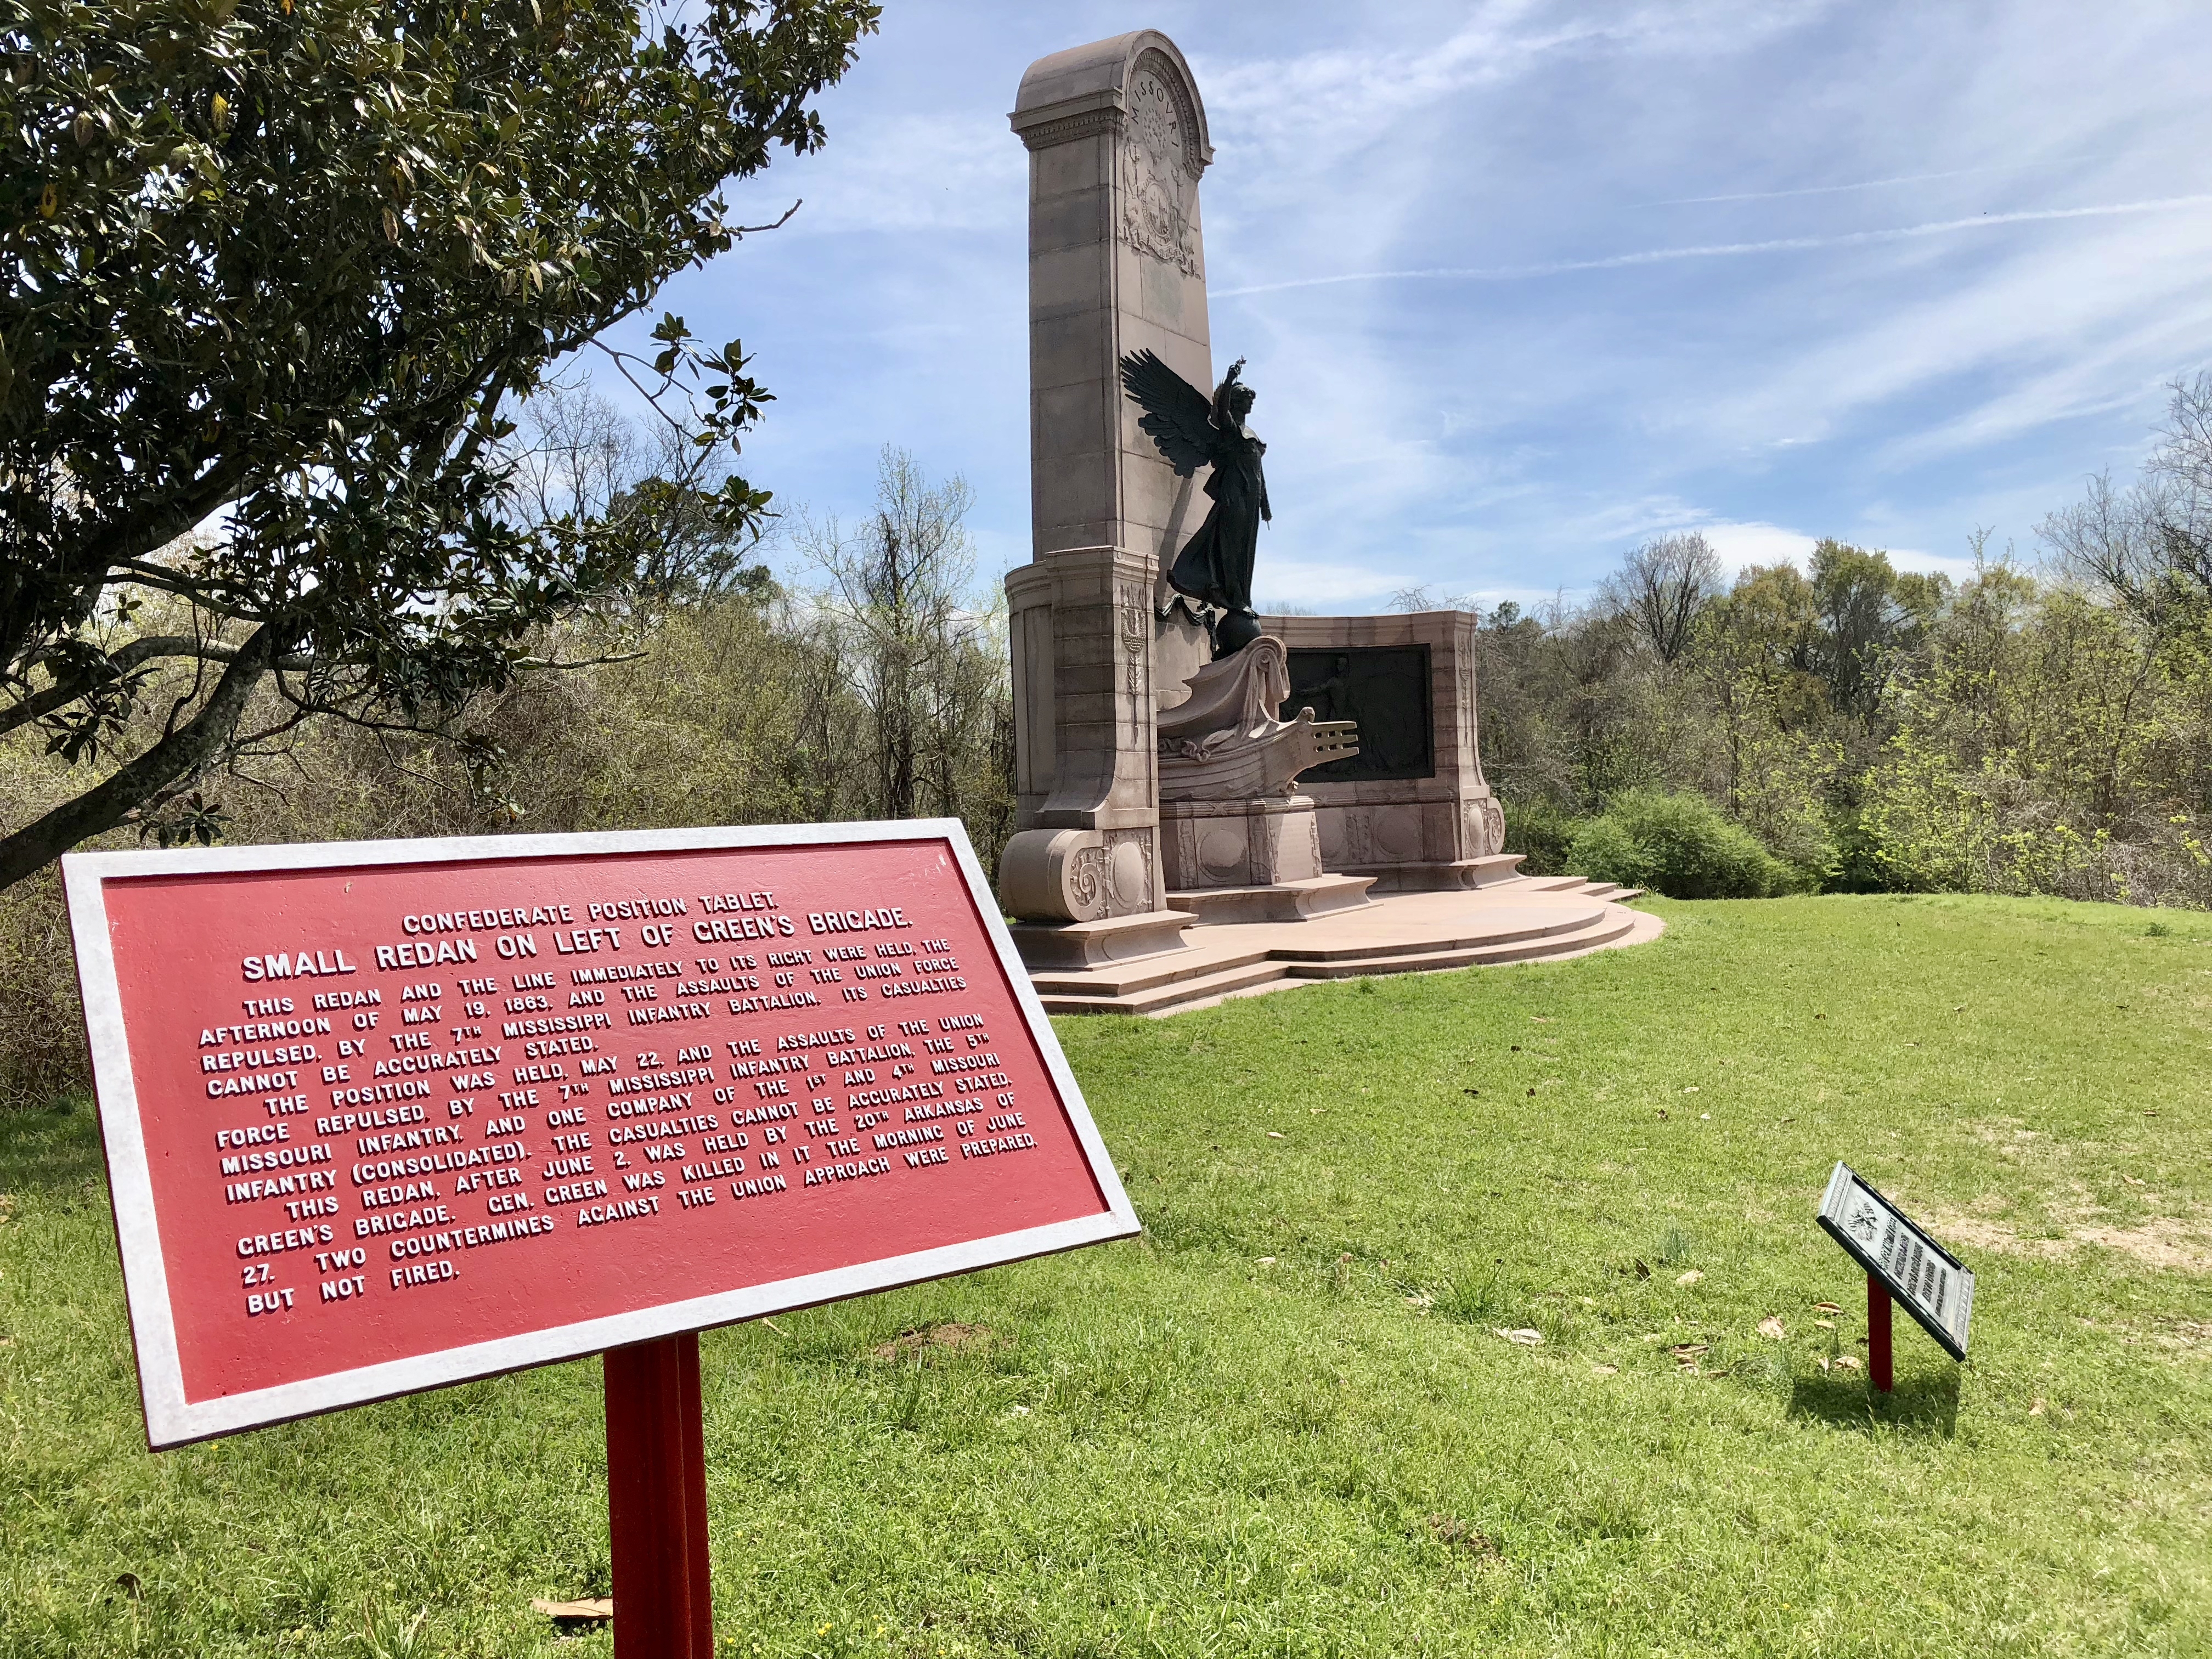 View of marker with Missouri Monument in background.